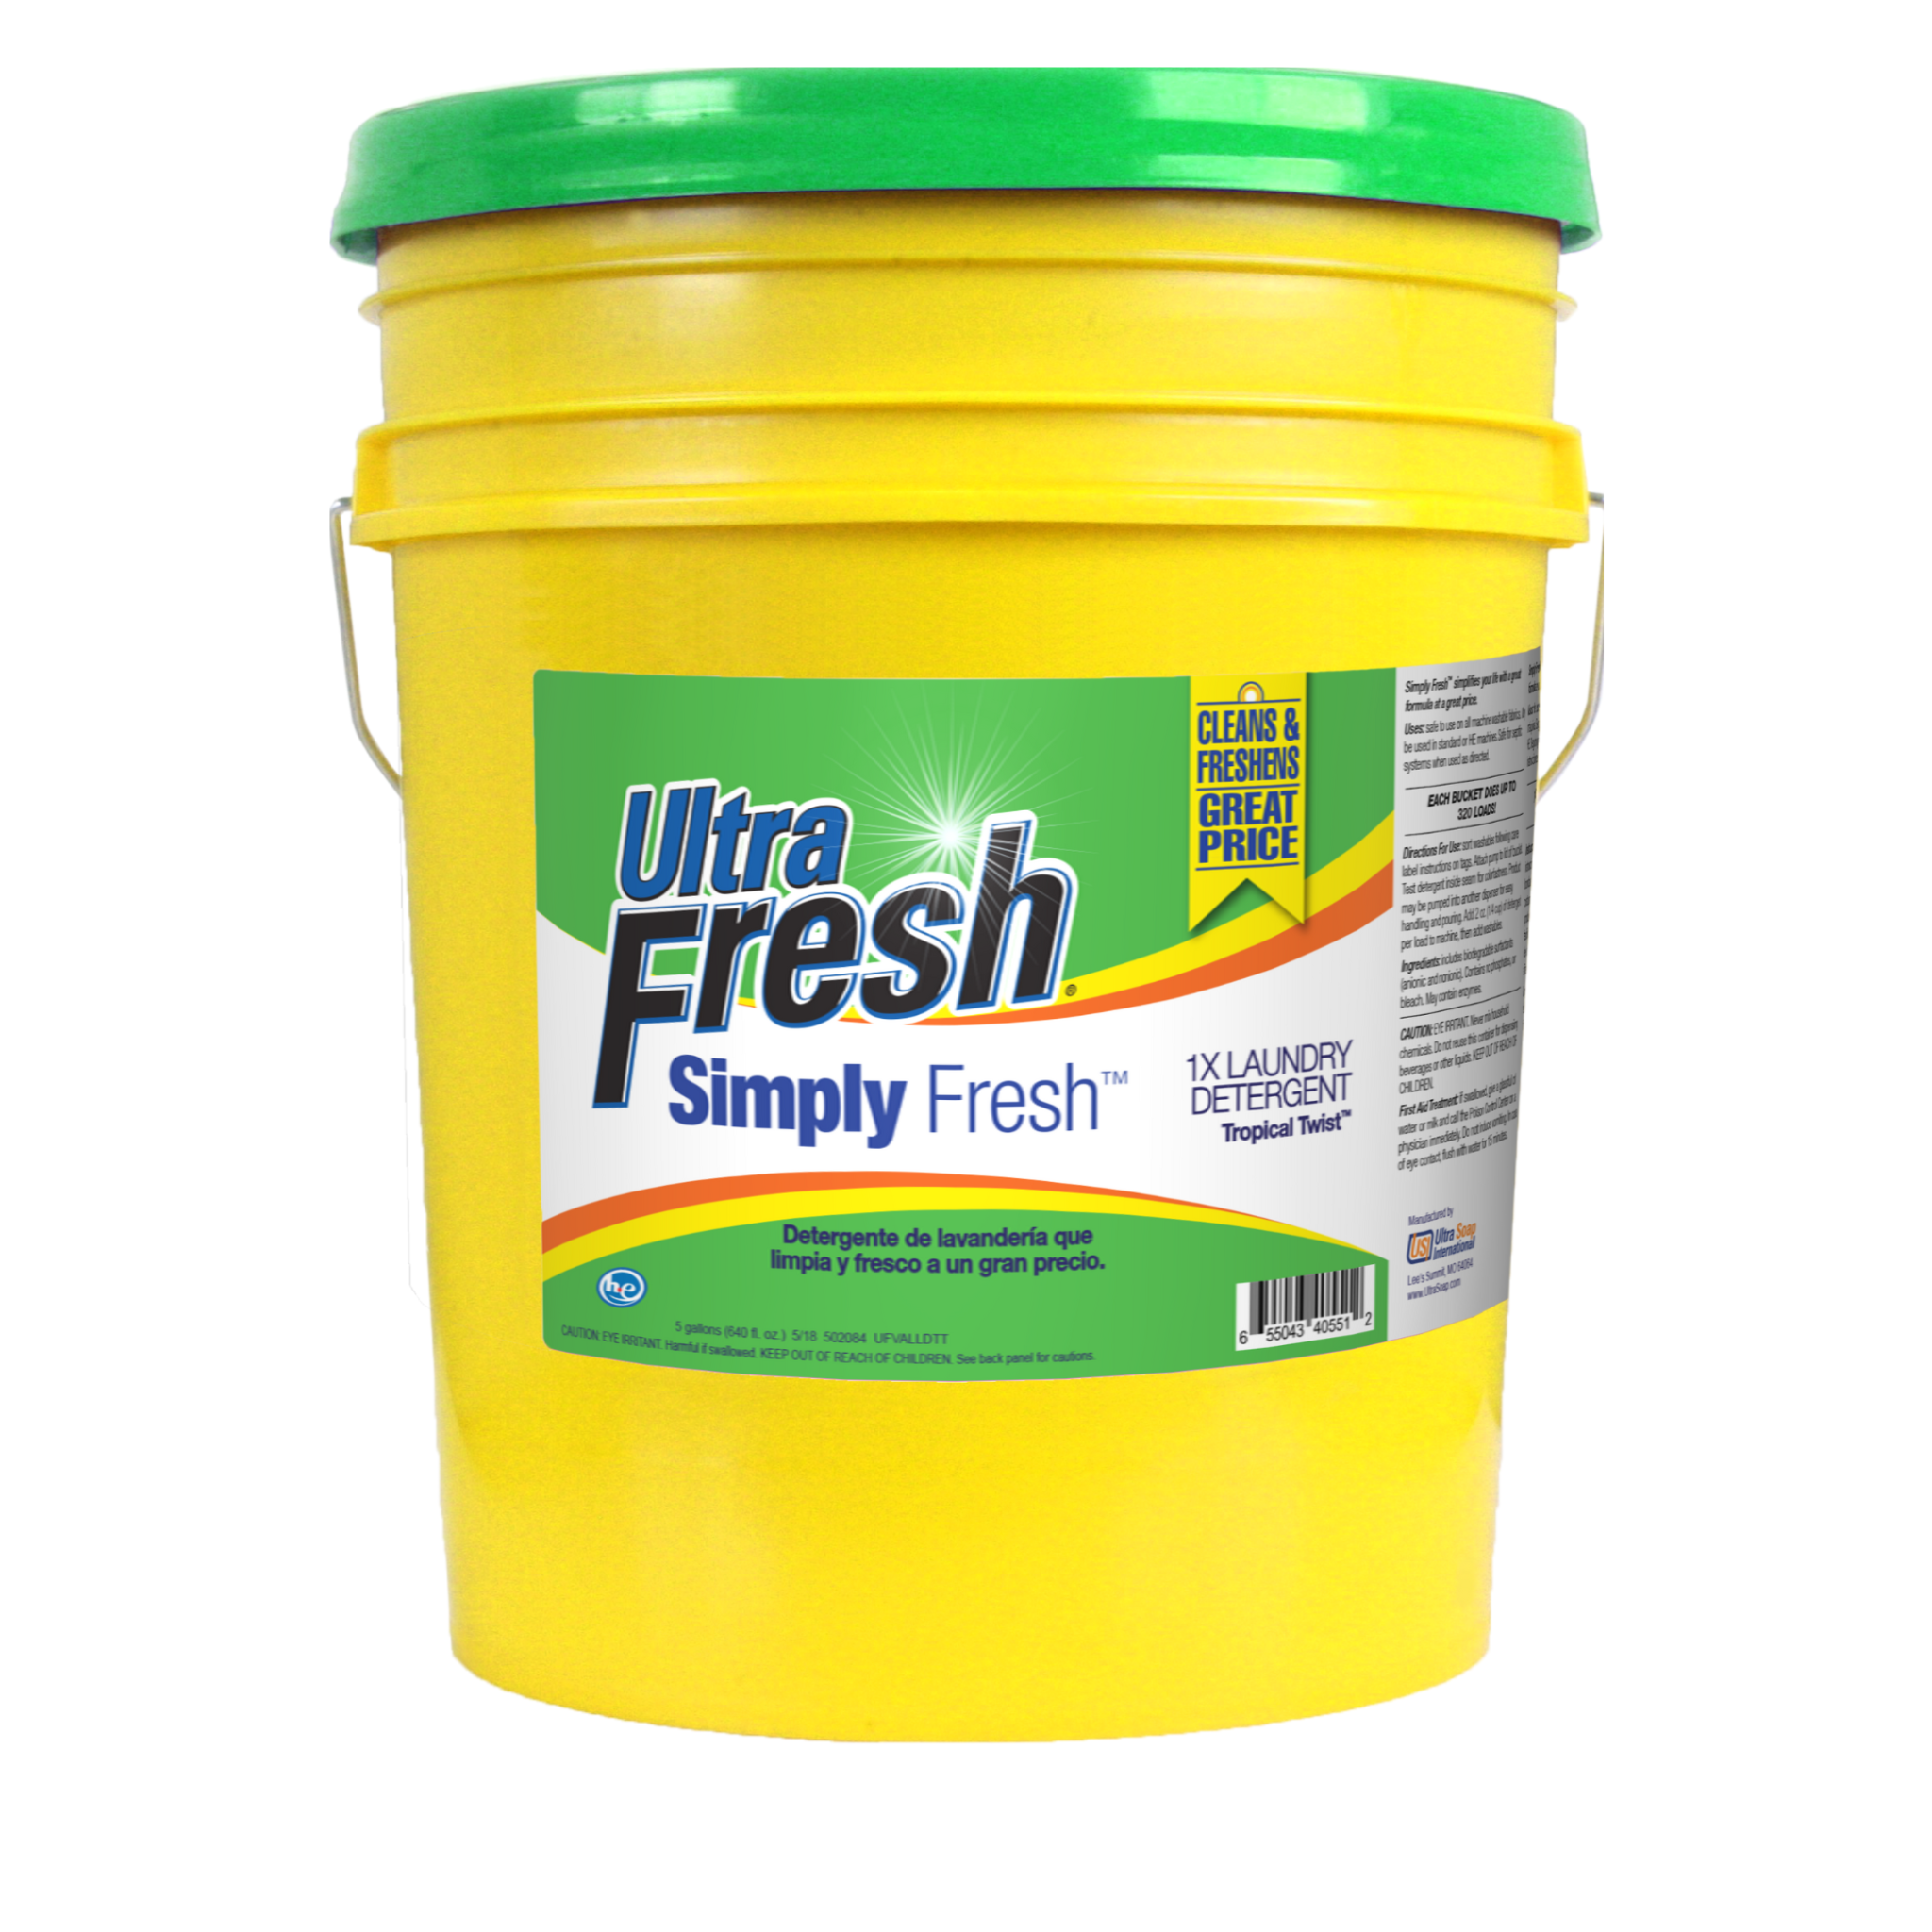 Simply Fresh Tropical Twist Laundry Detergent - 5 Gallons